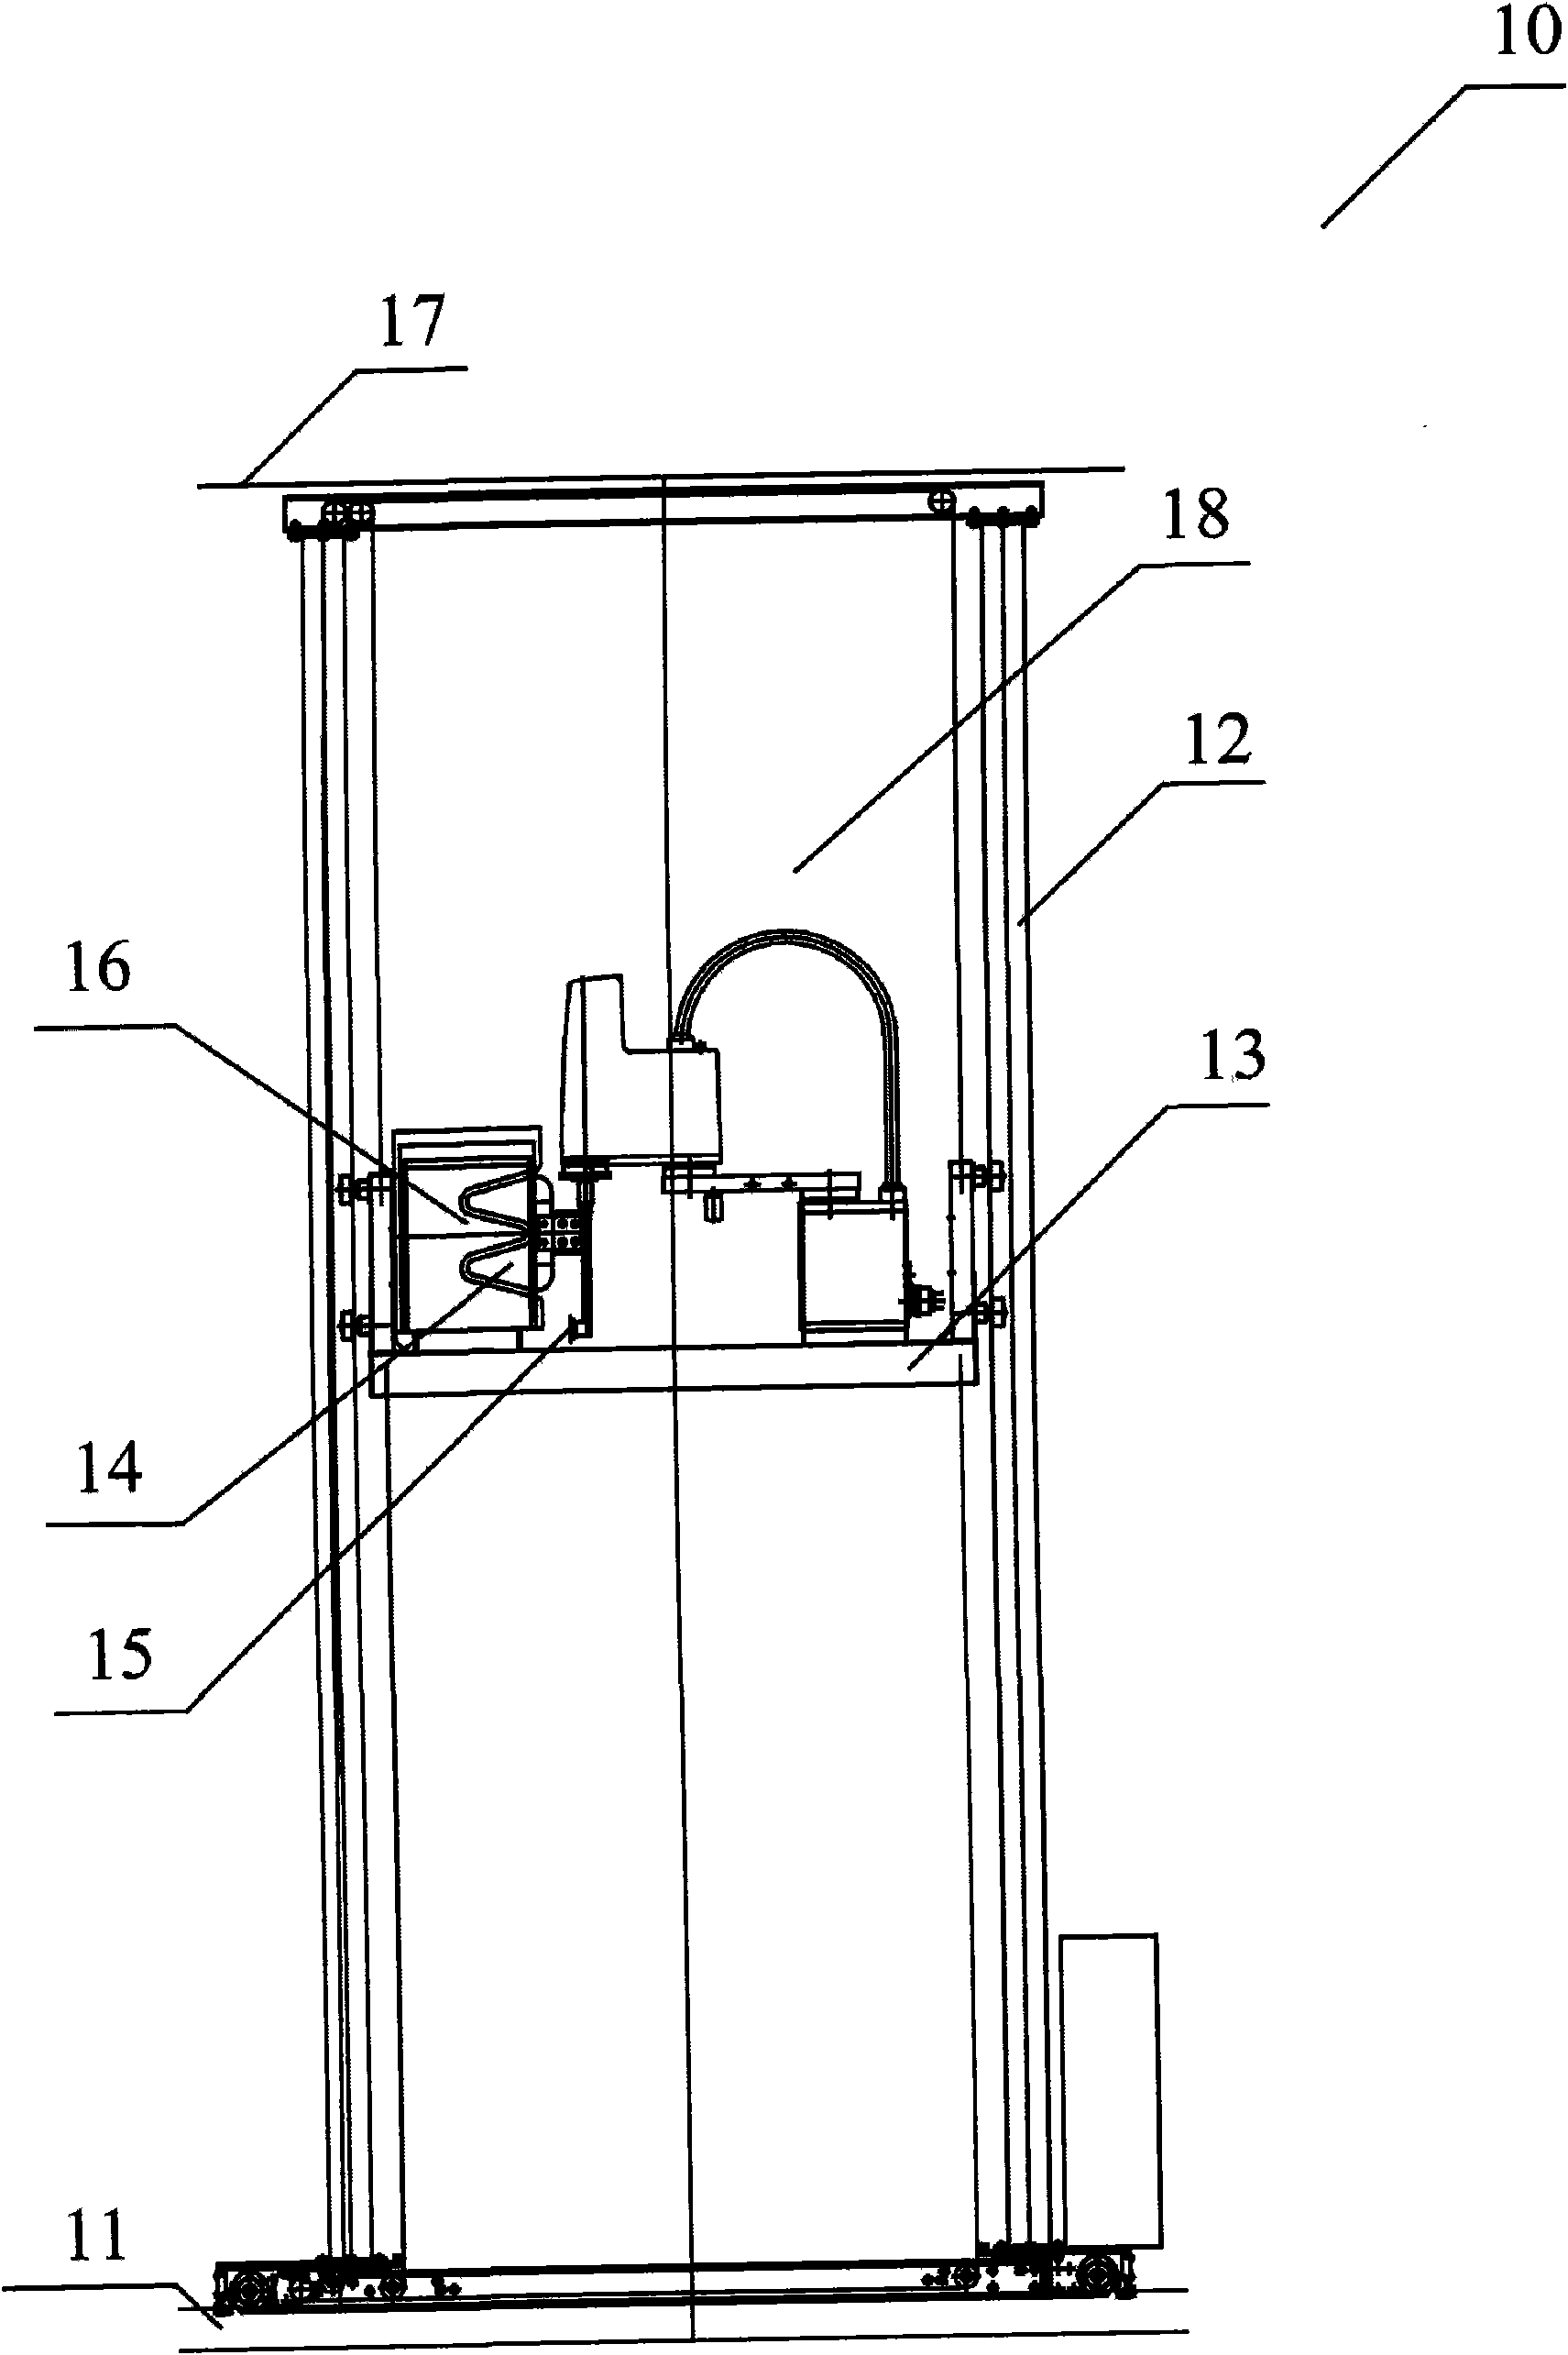 Automatic storing and fetching system of goods